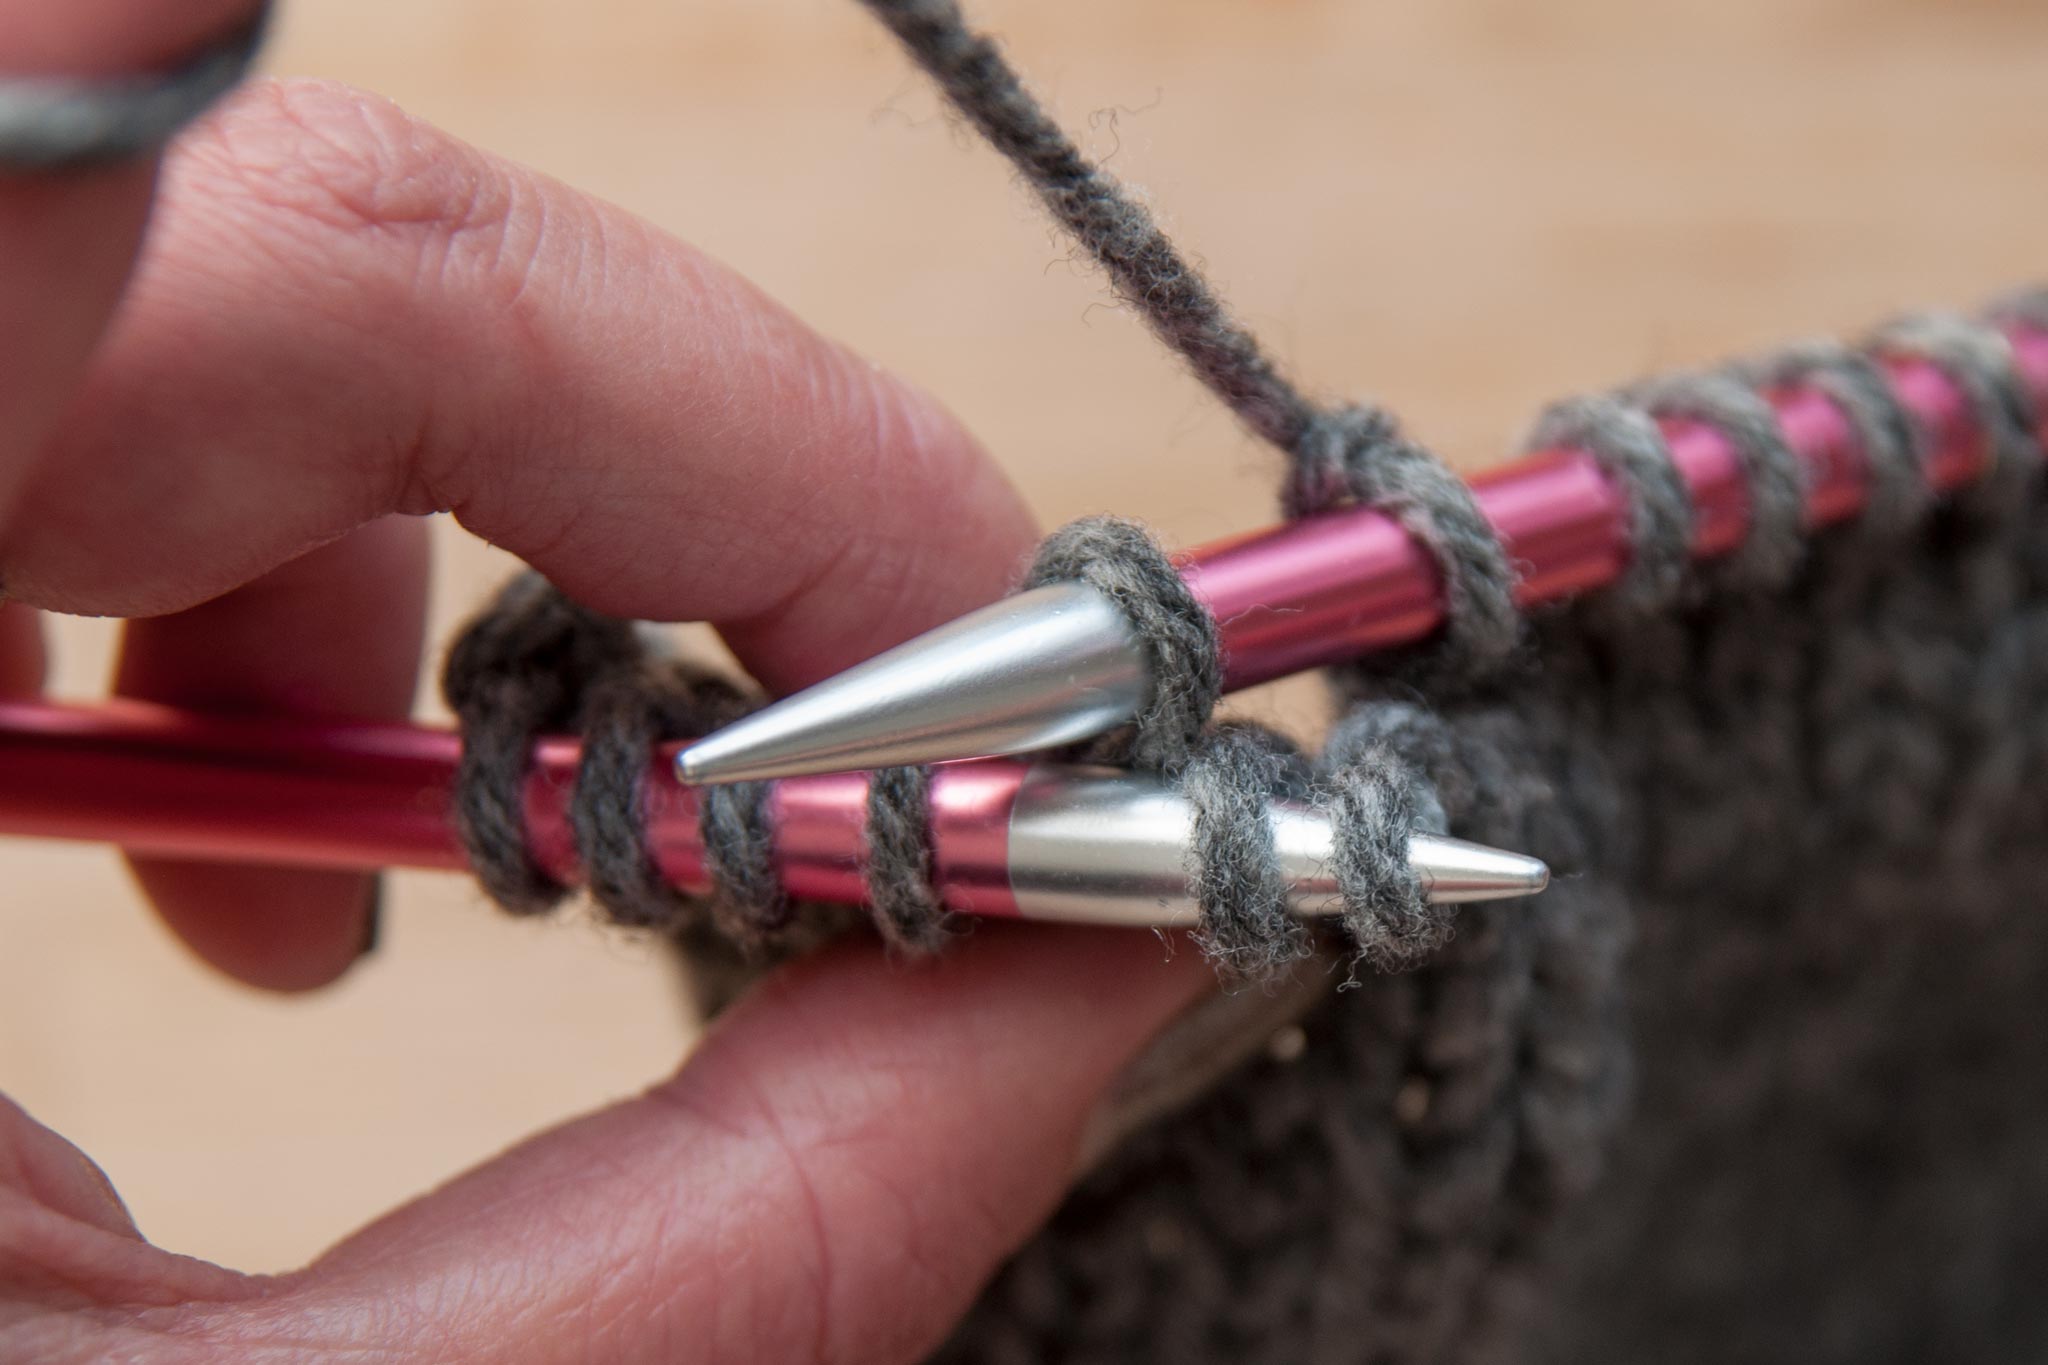 Pick up 2 loose stitches with the left needle at the front.